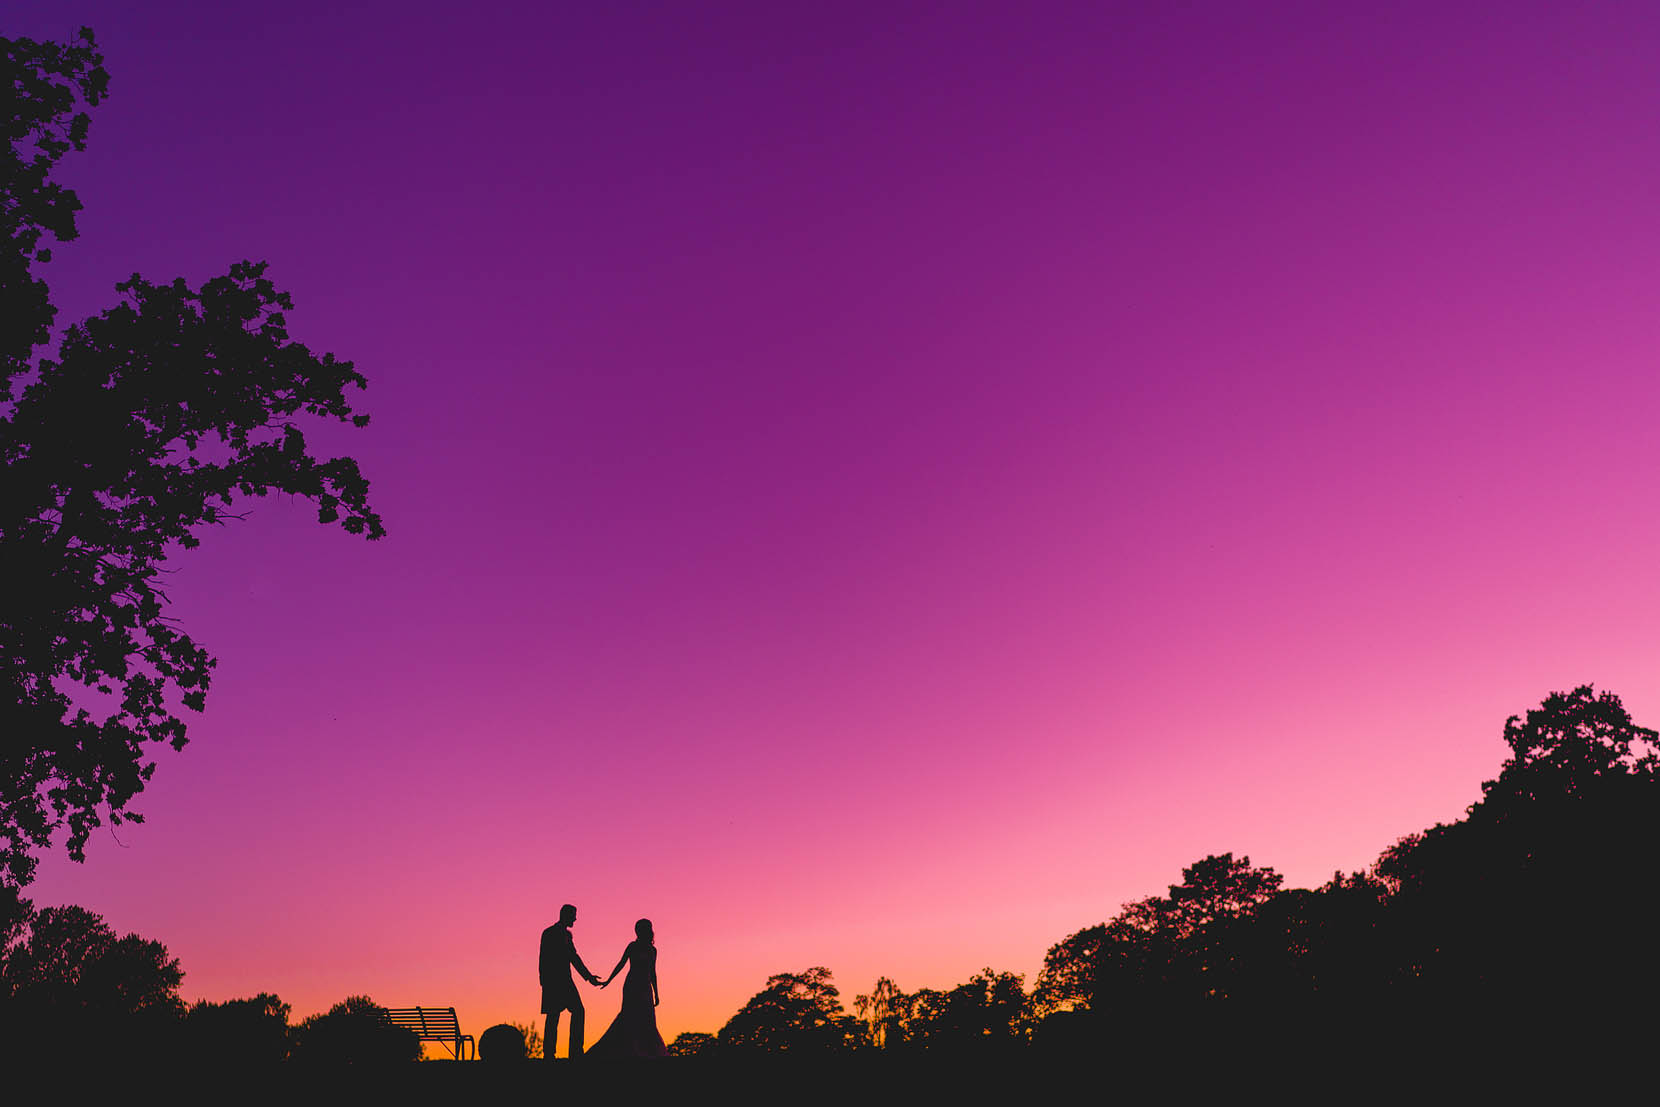 oxnead hall summer wedding of laura and steve with a gorgeous colourful sunset